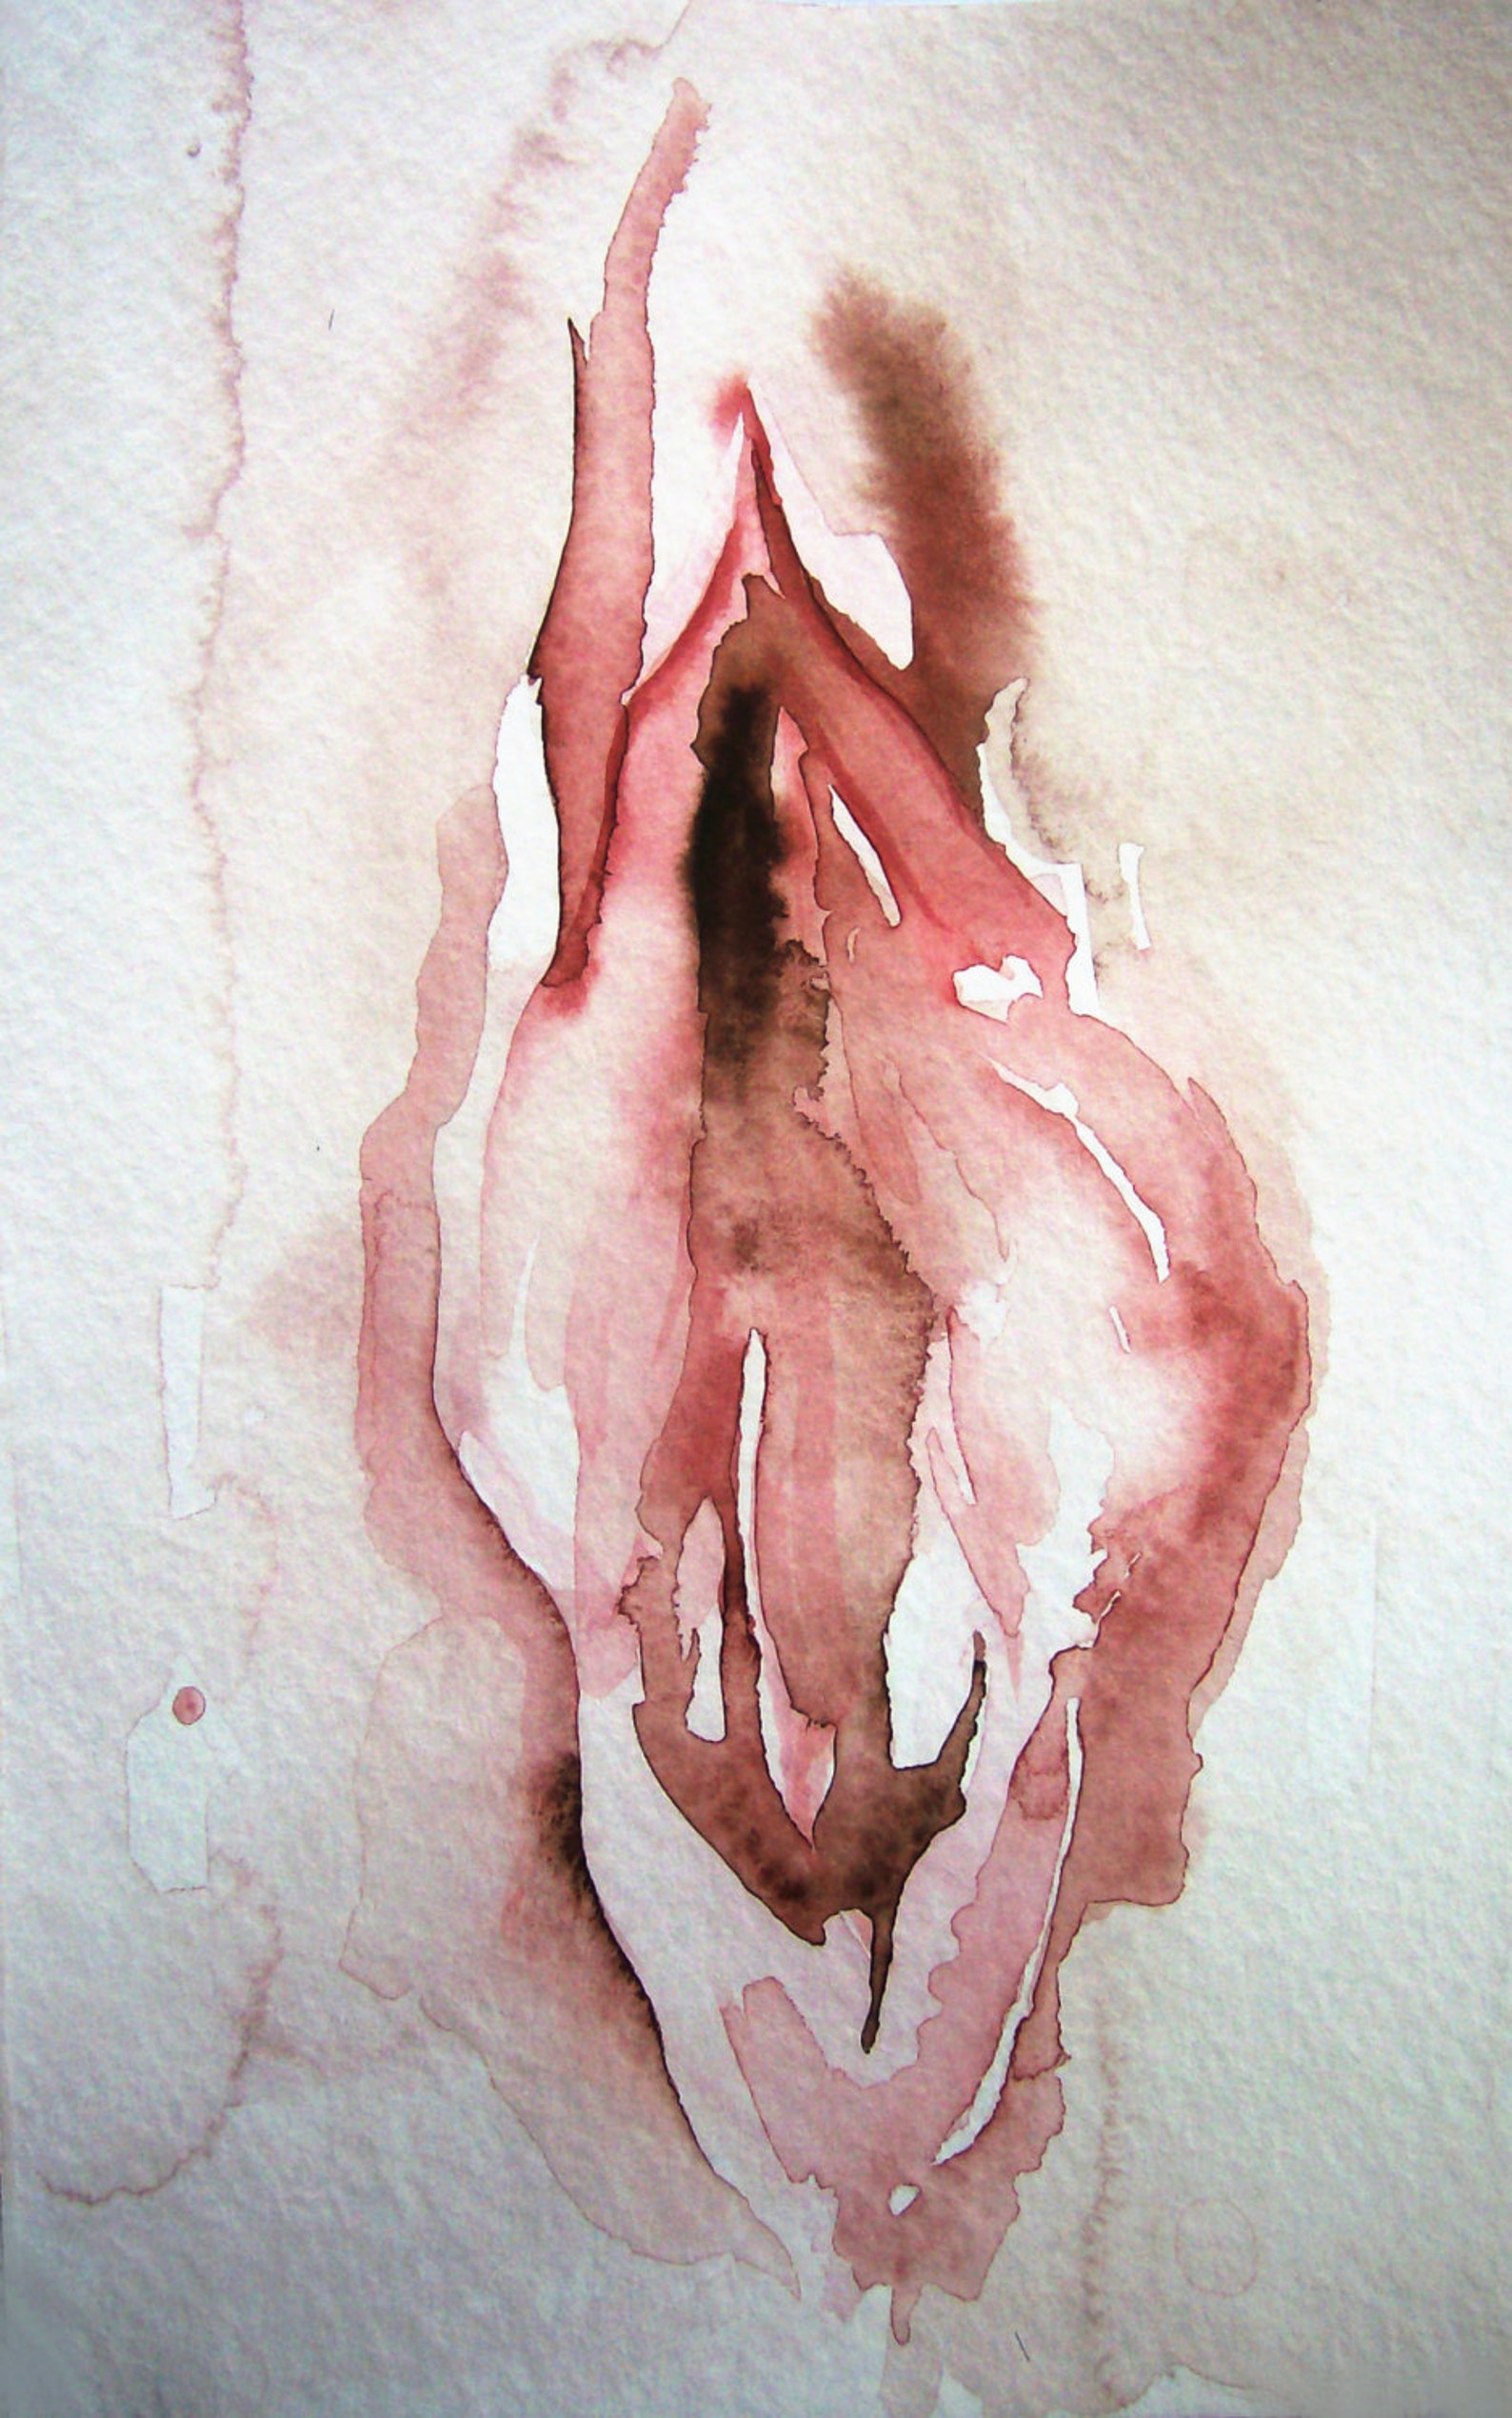 Vulva Painting Small But Great Blue Poster